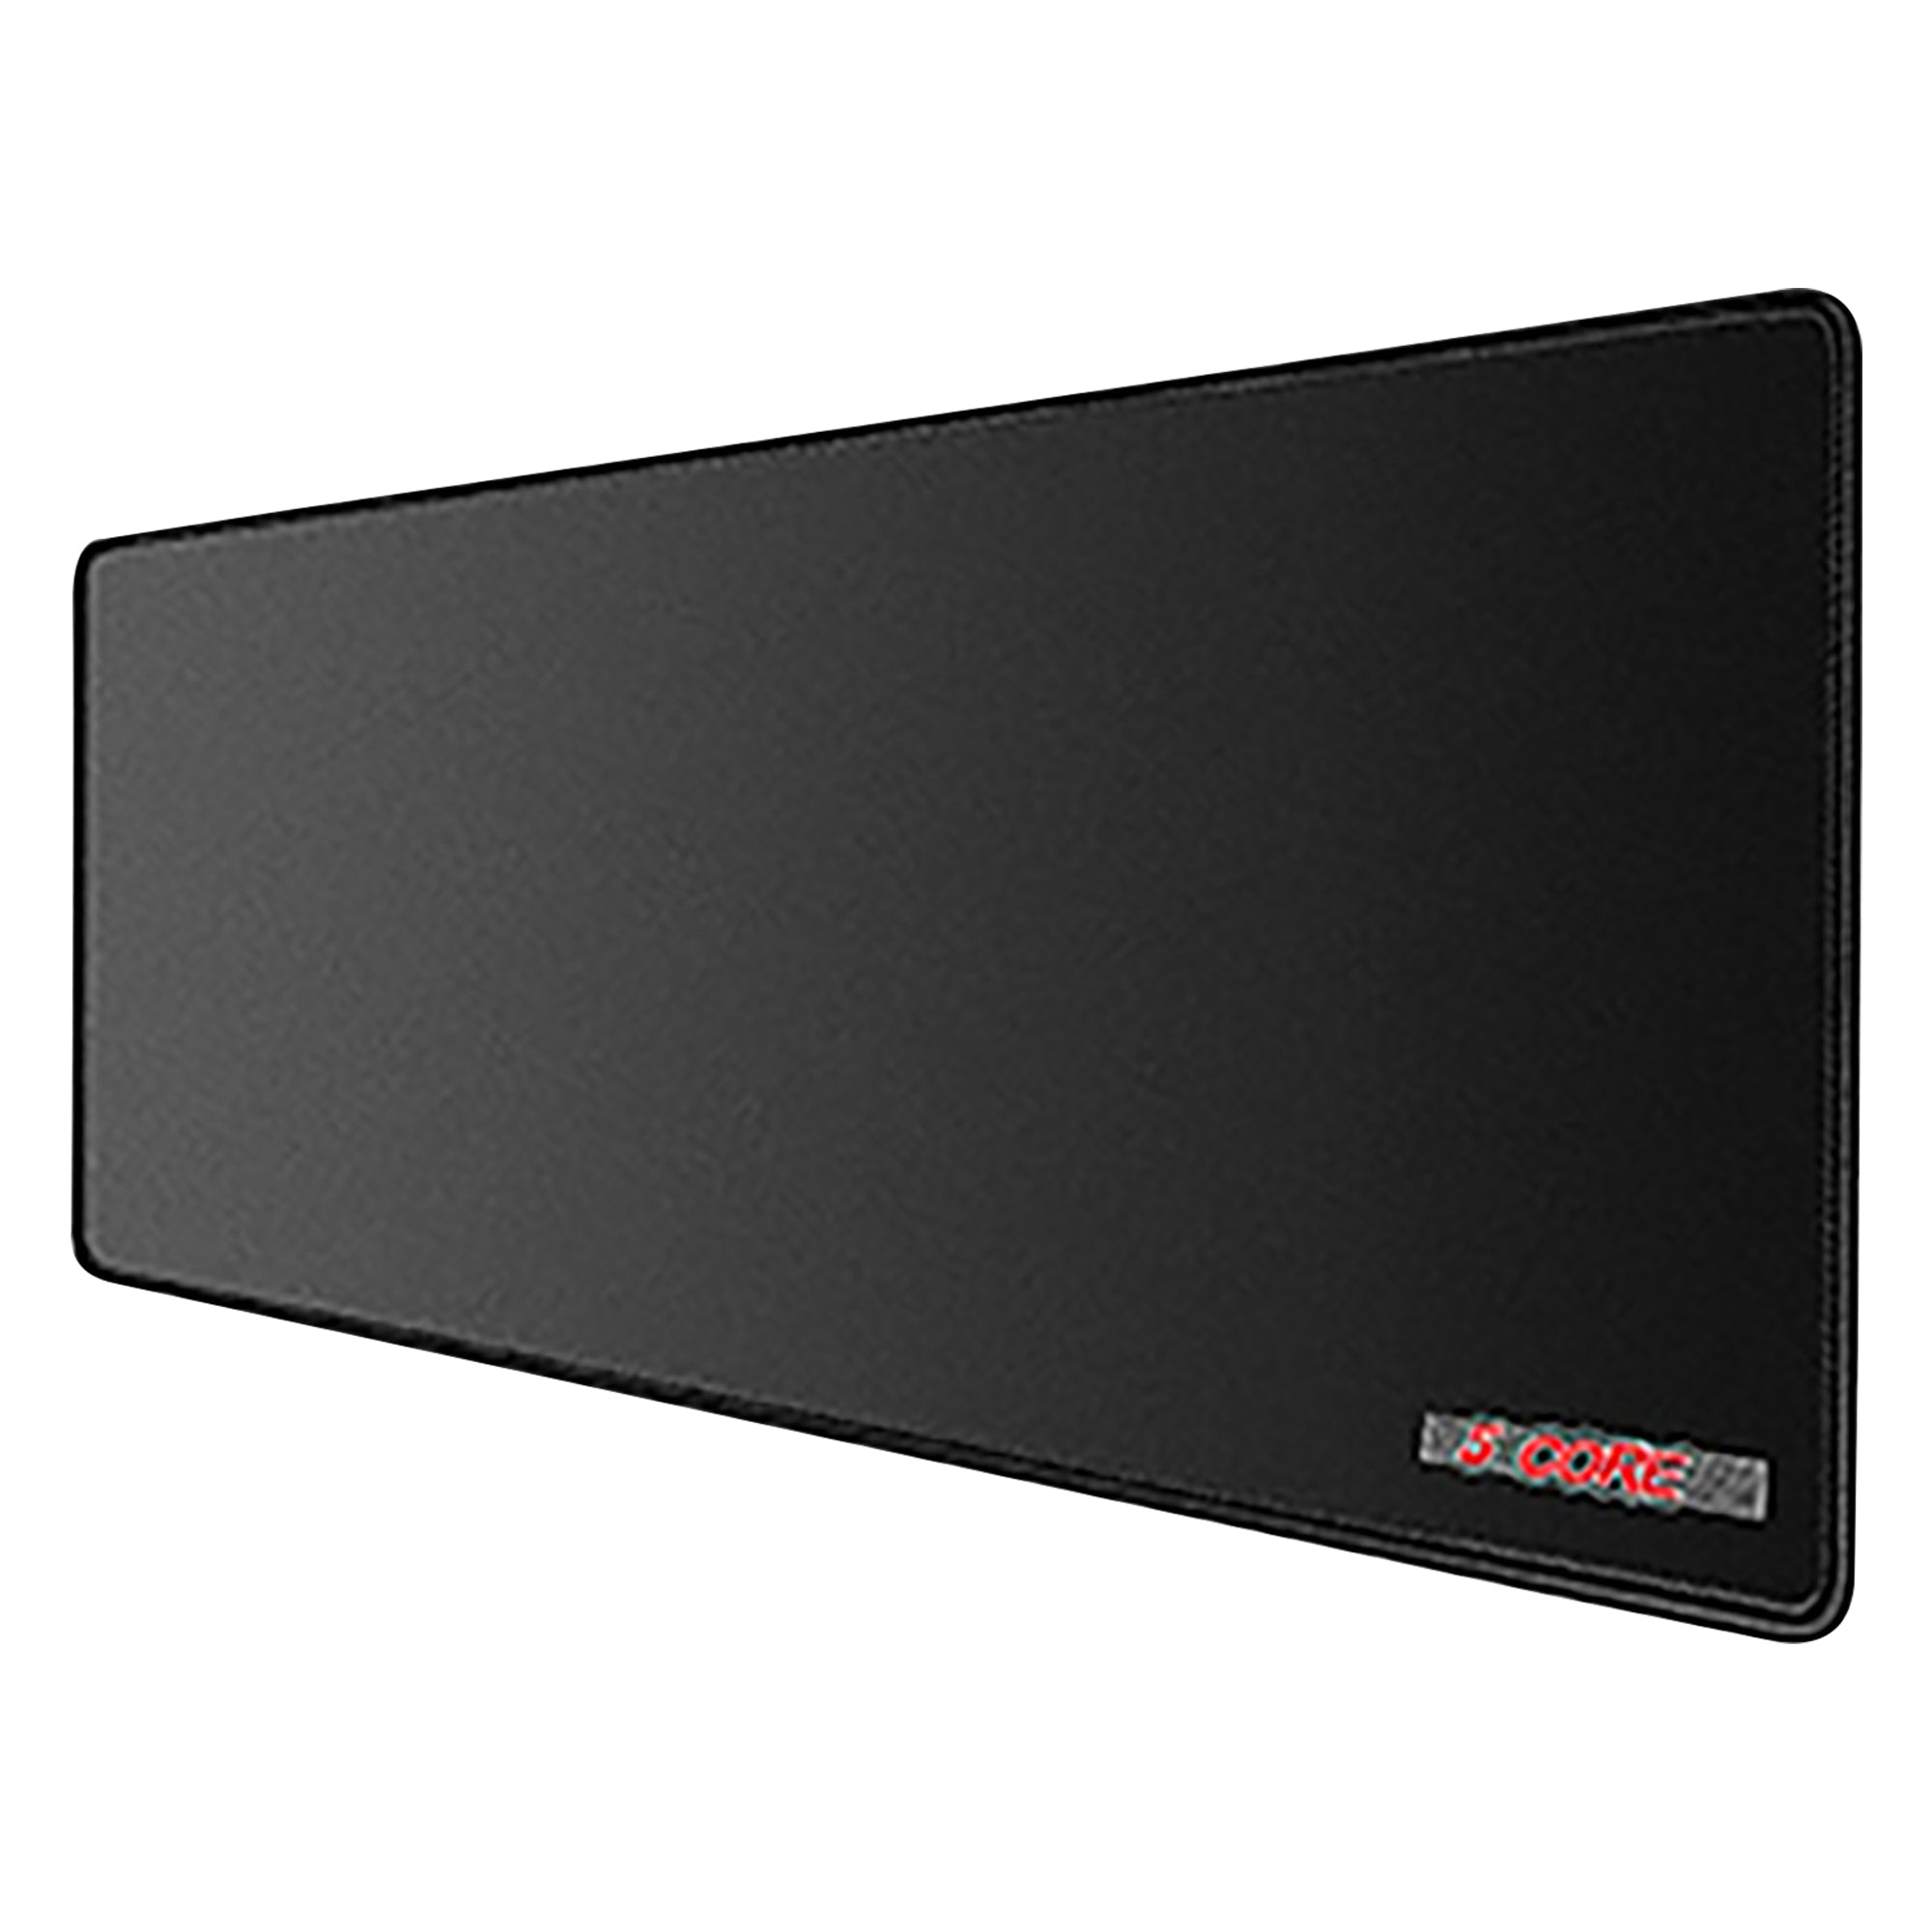 5 Core Large Gaming Mouse Pad Extended Mouse Mat with Stitched Edges Durable Non-Slip Rubber Base